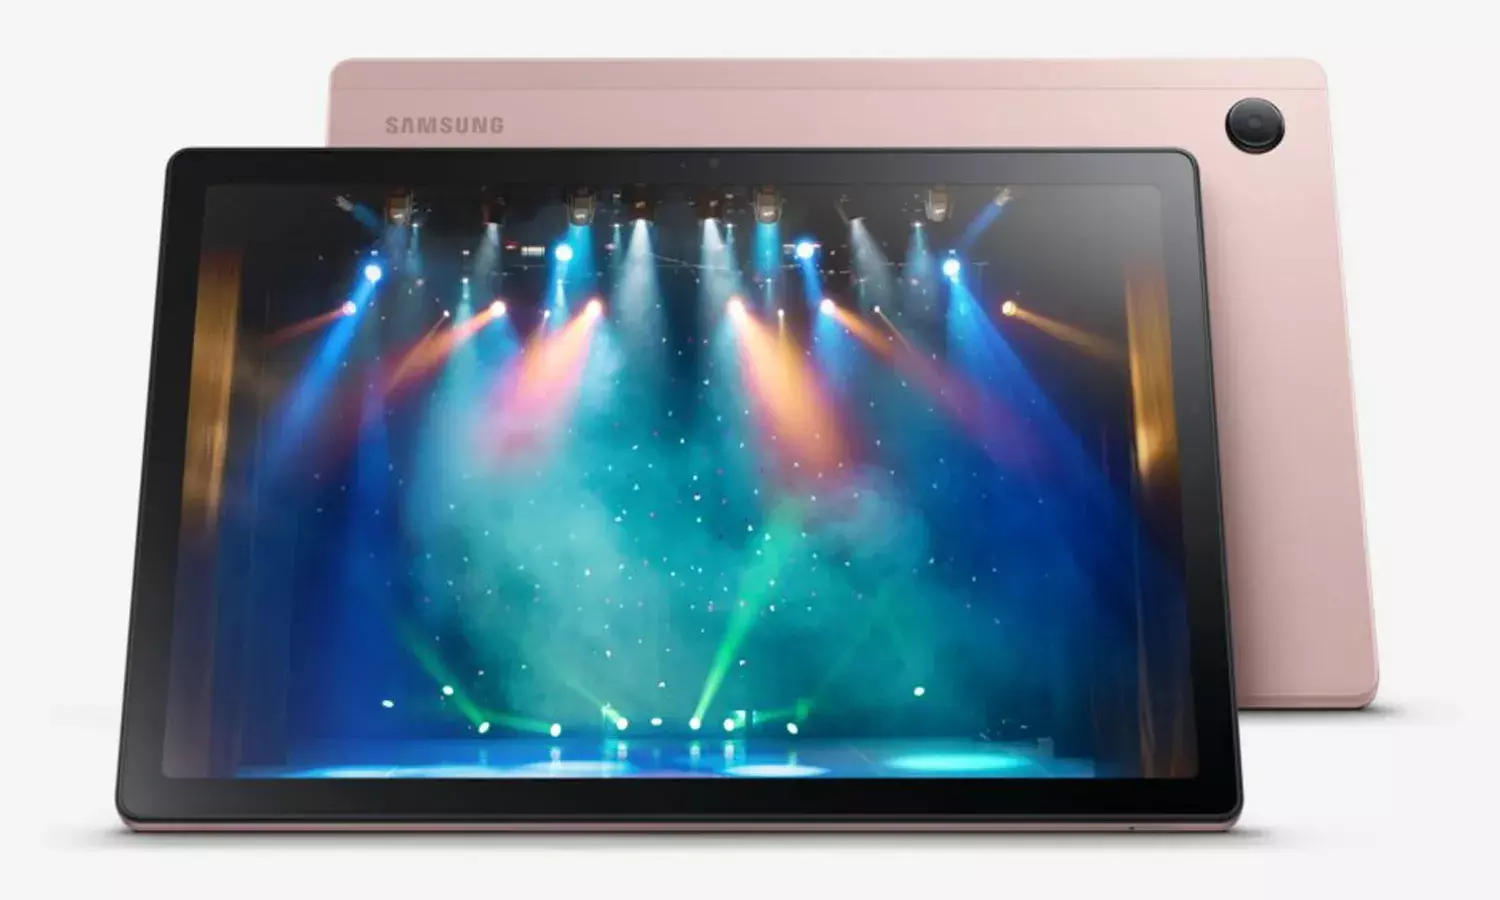 Samsung launches tablet with big screen, 1TB storage support; Check details